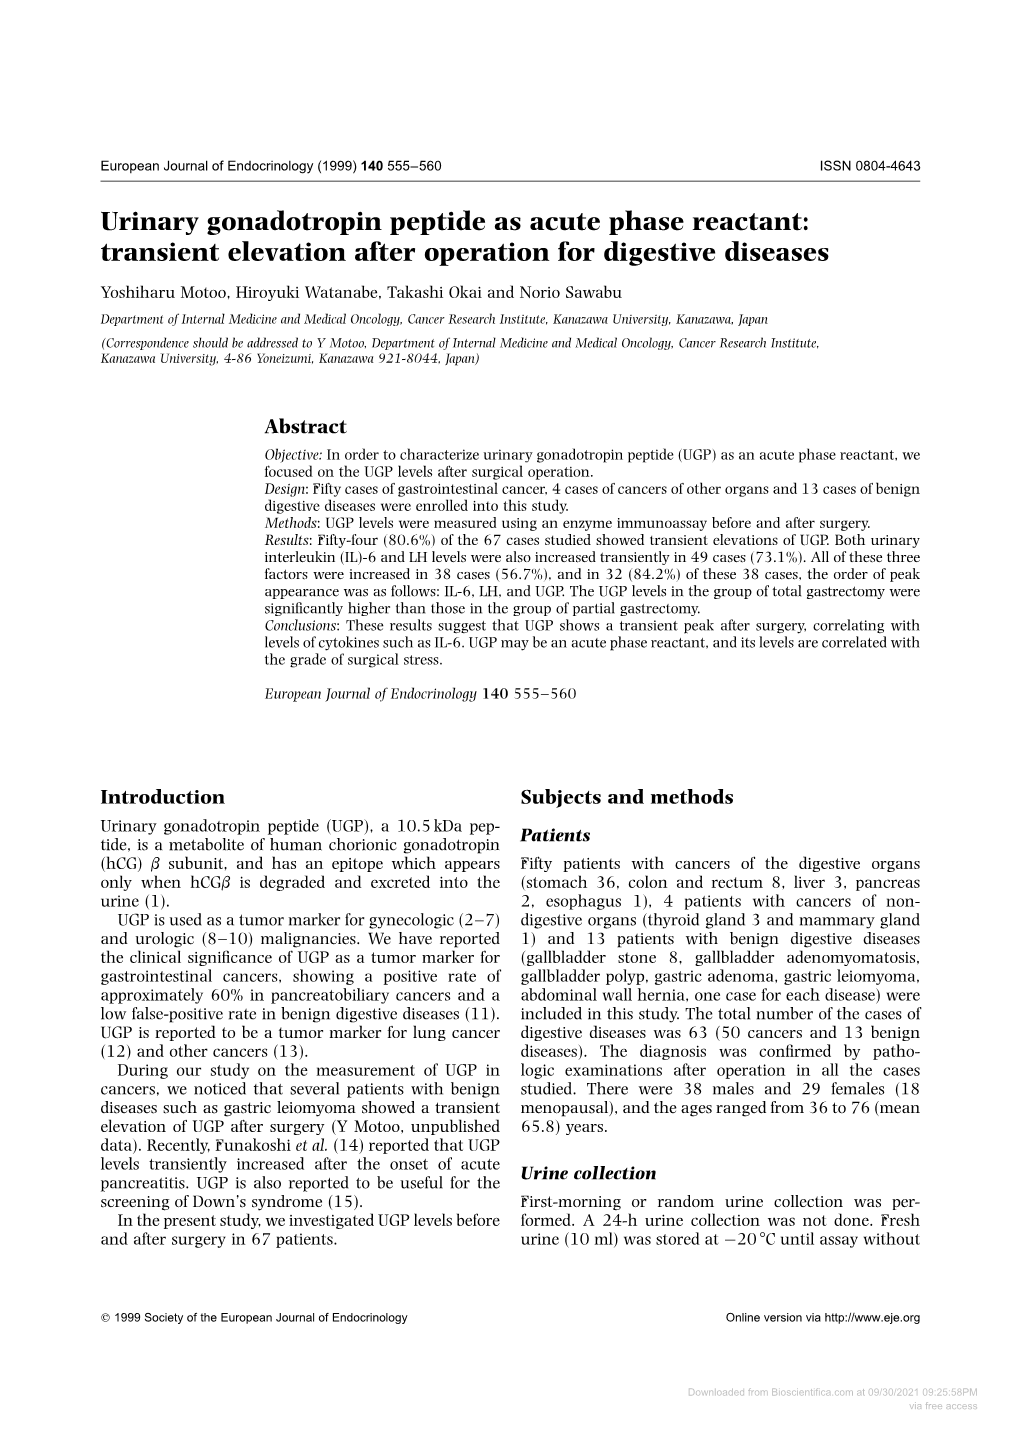 Urinary Gonadotropin Peptide As Acute Phase Reactant: Transient Elevation After Operation for Digestive Diseases